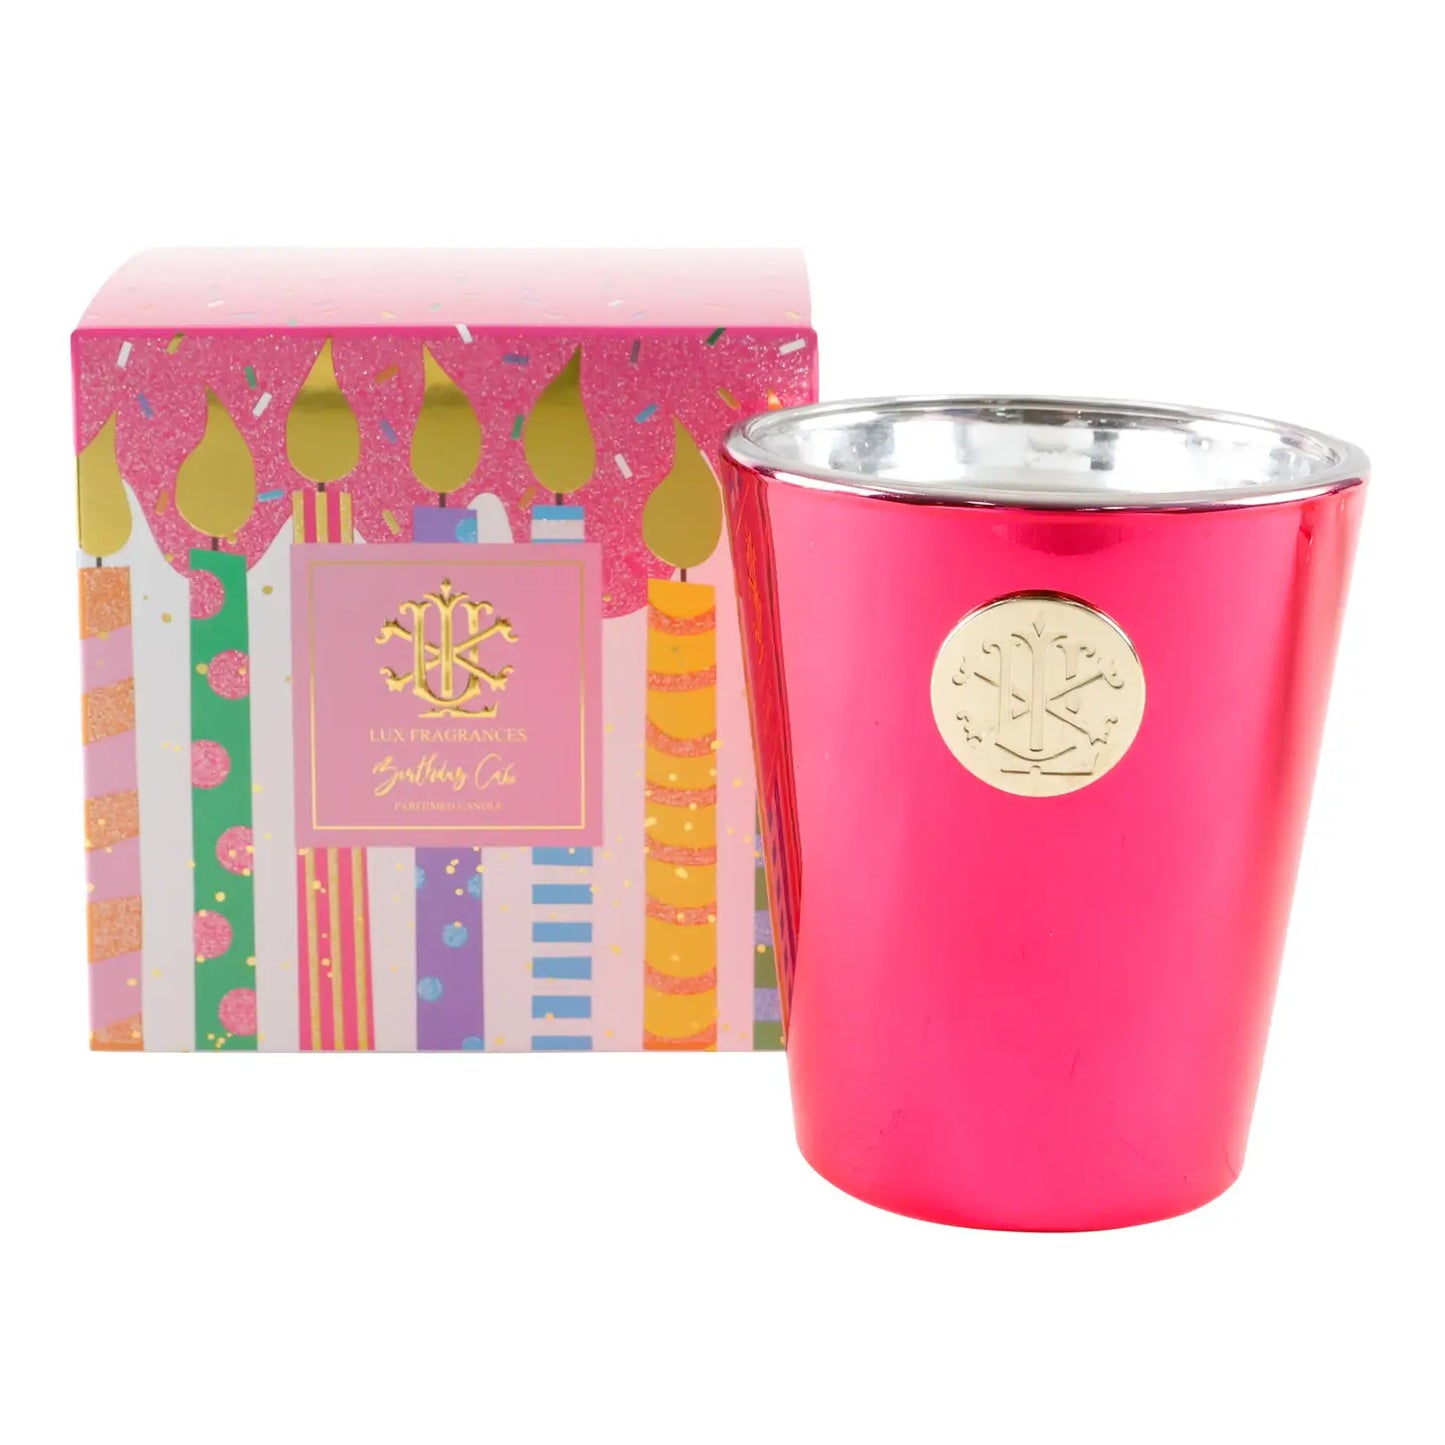 Lux Fragrances Birthday Cake - 8oz Designer Boxed Candle available at The Good Life Boutique